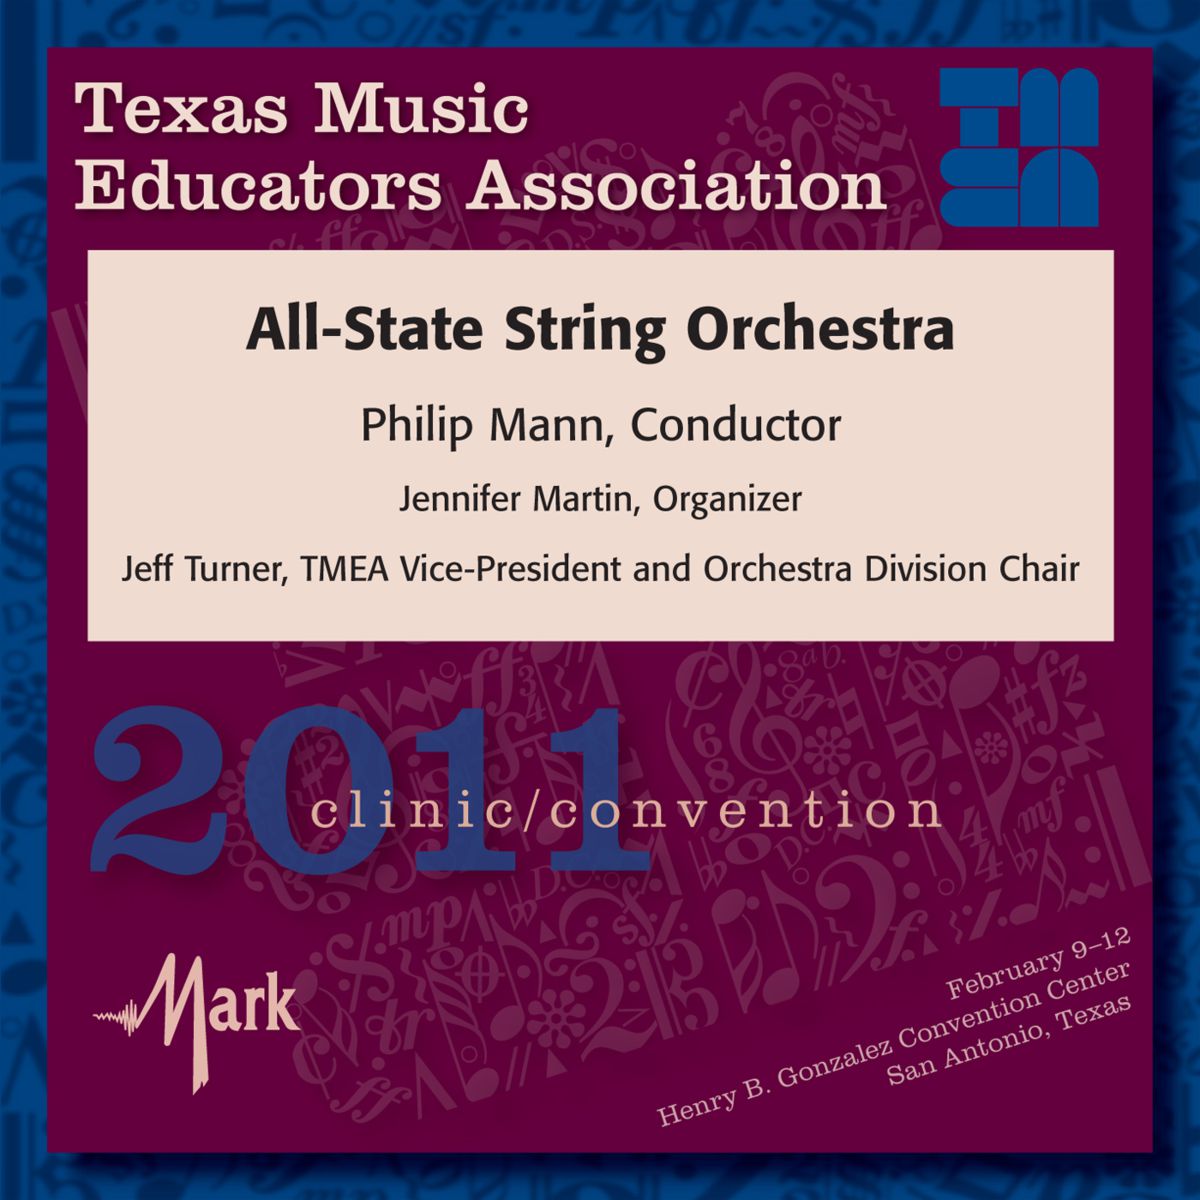 2011 Texas Music Educators Association: All-State String Orchestra - click here